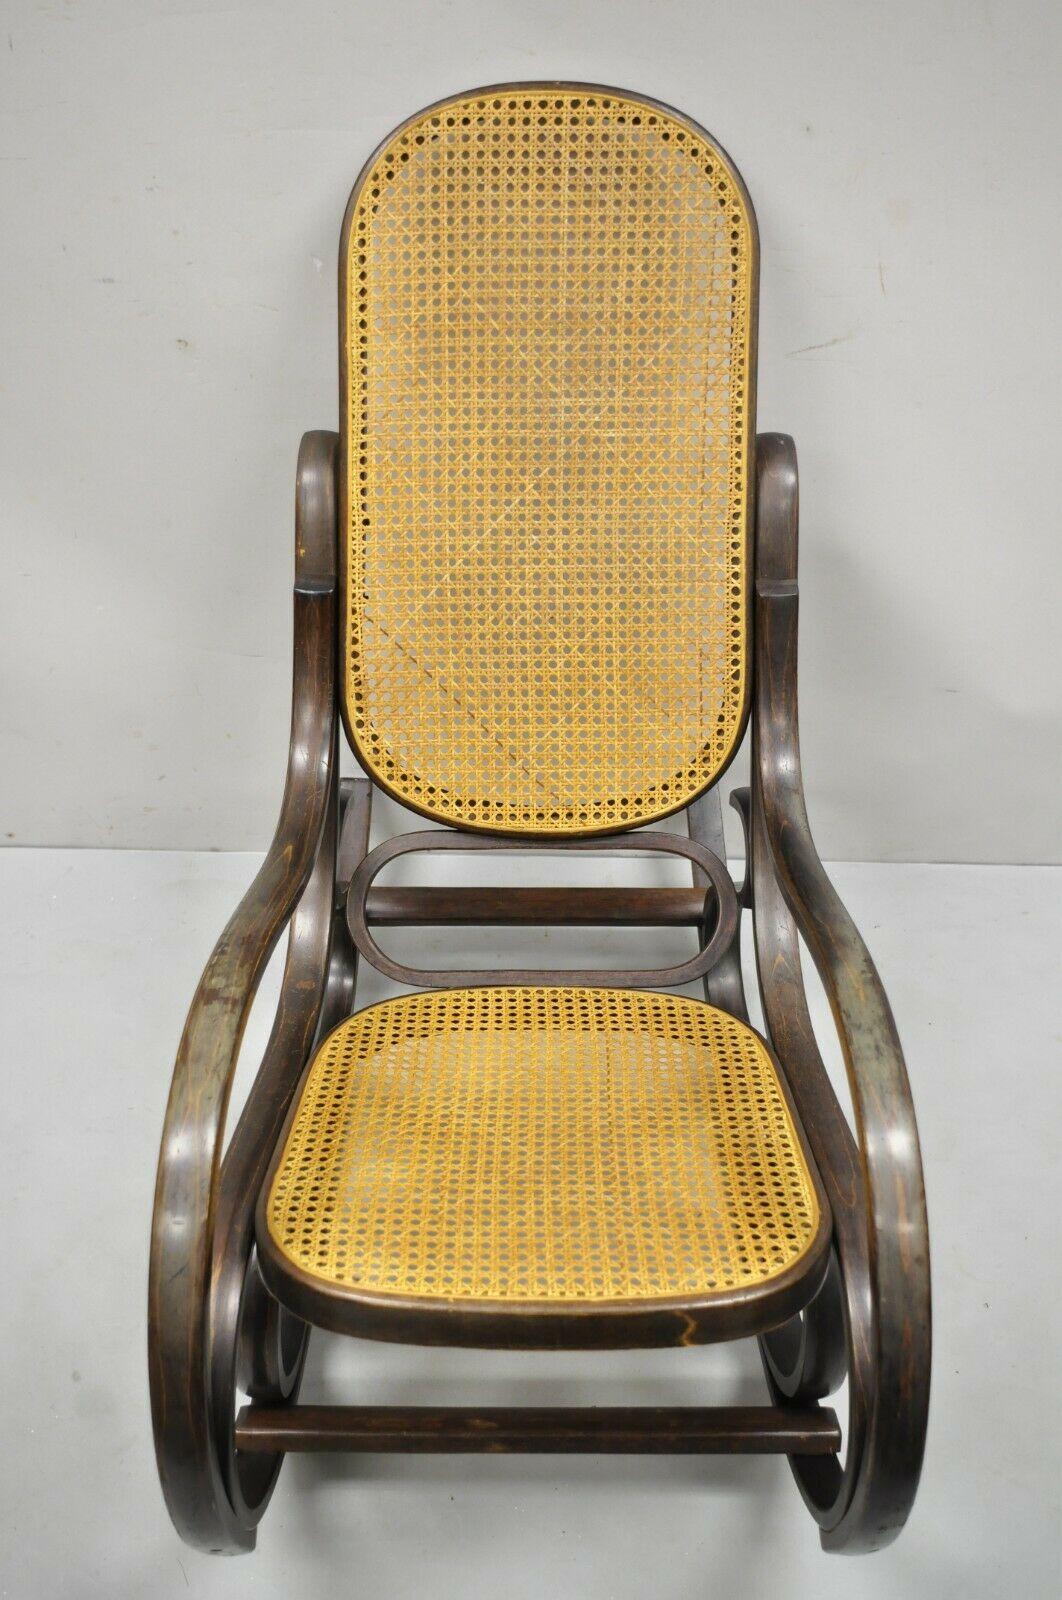 Antique Austrian Thonet bentwood and cane rocker rocking chair. Item features a shapely bentwood frame, cane back and seat, very nice antique, quality craftsmanship. Circa Early 1900s. Measurements: 39